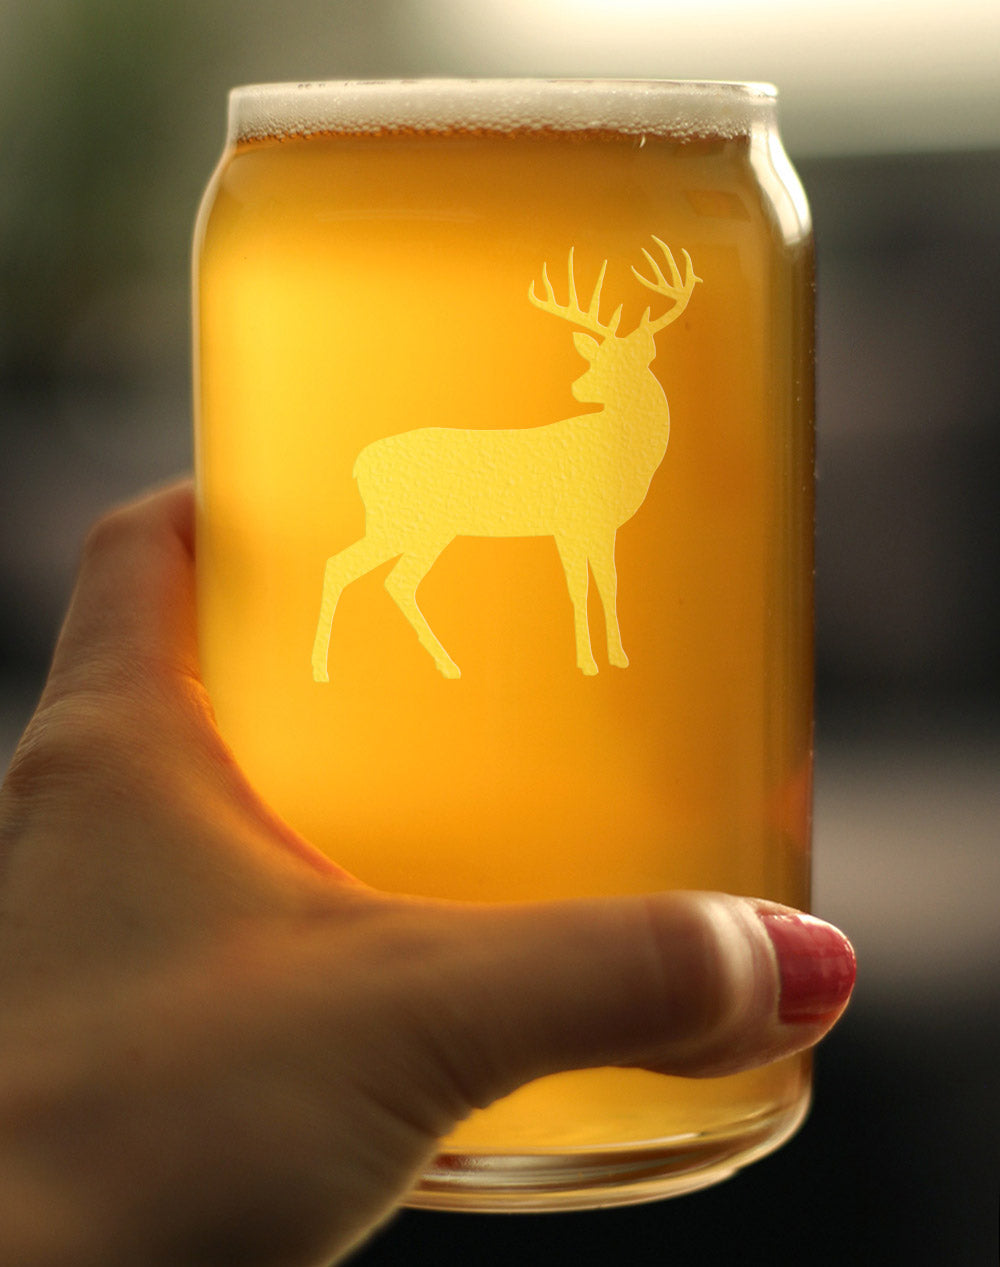 Deer Beer Can Pint Glass - Cabin Themed Gifts or Rustic Decor for Men and Women - Fun Drinking or Party Glasses - 16 oz